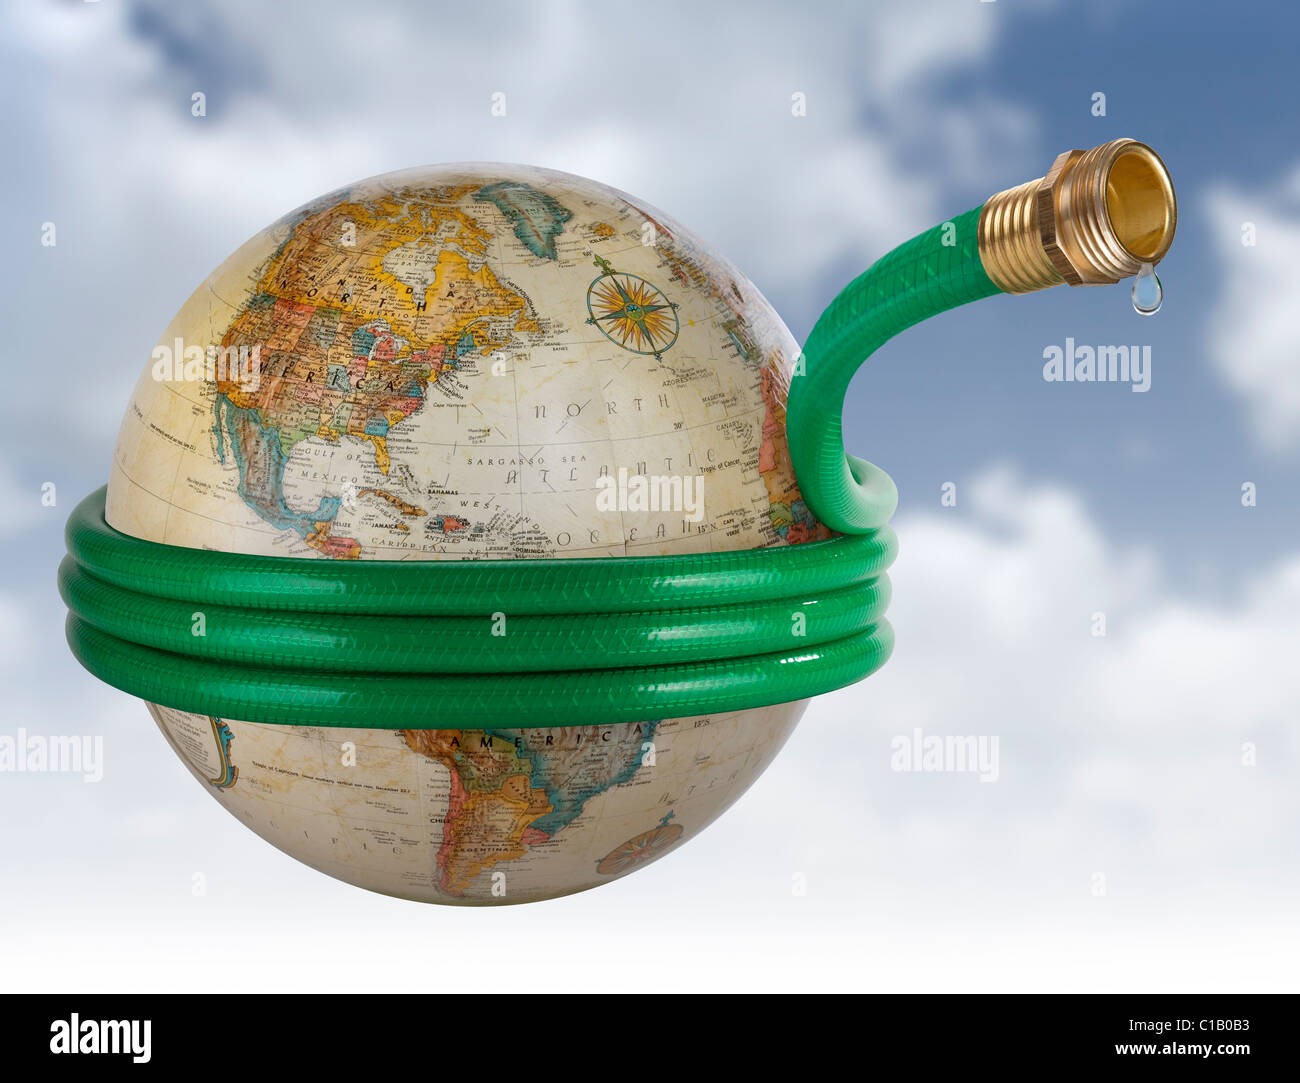 A hose wrapped around a globe in a Global Water Issues concept image. Stock Photo